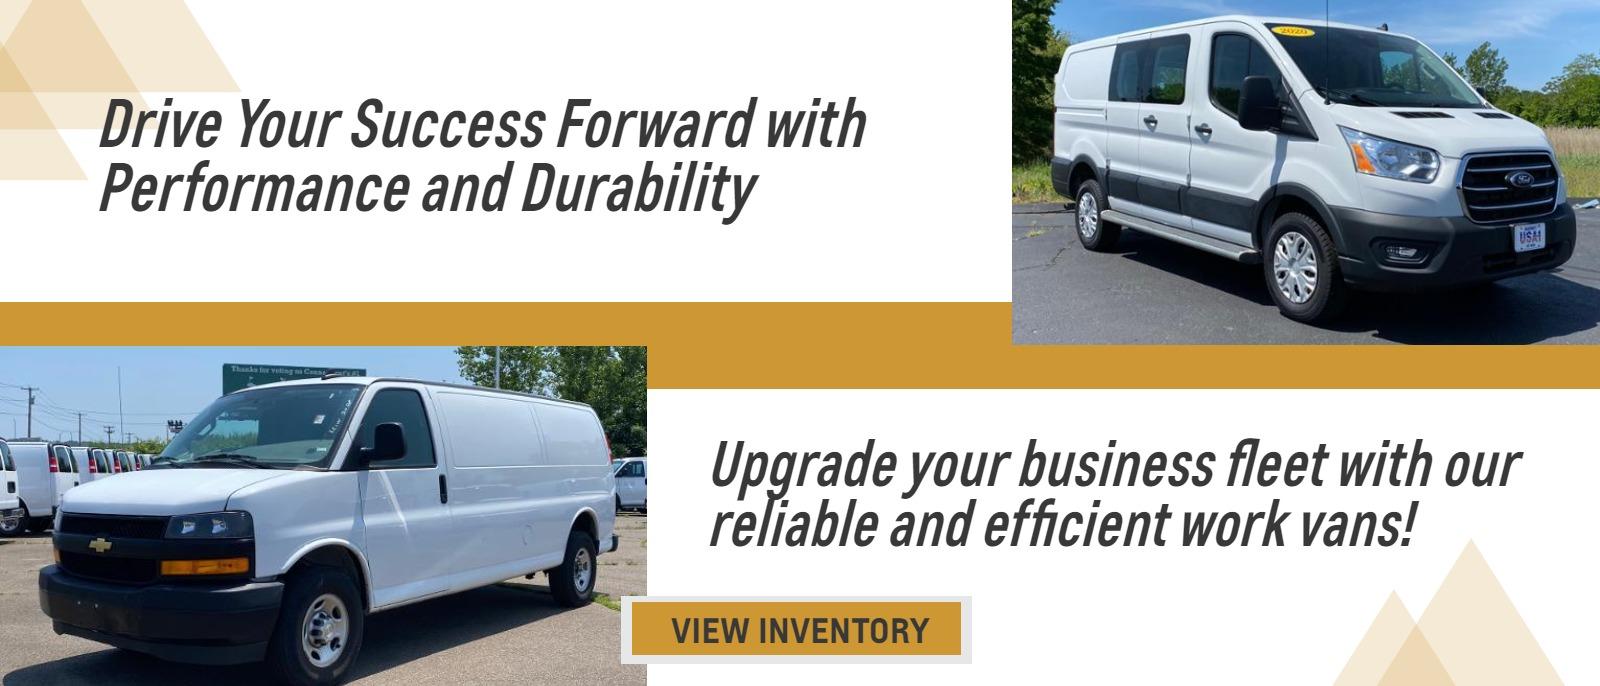 "Drive Your Success Forward with Performance and Durability"

"Upgrade your business fleet with our reliable and efficient work vans!"